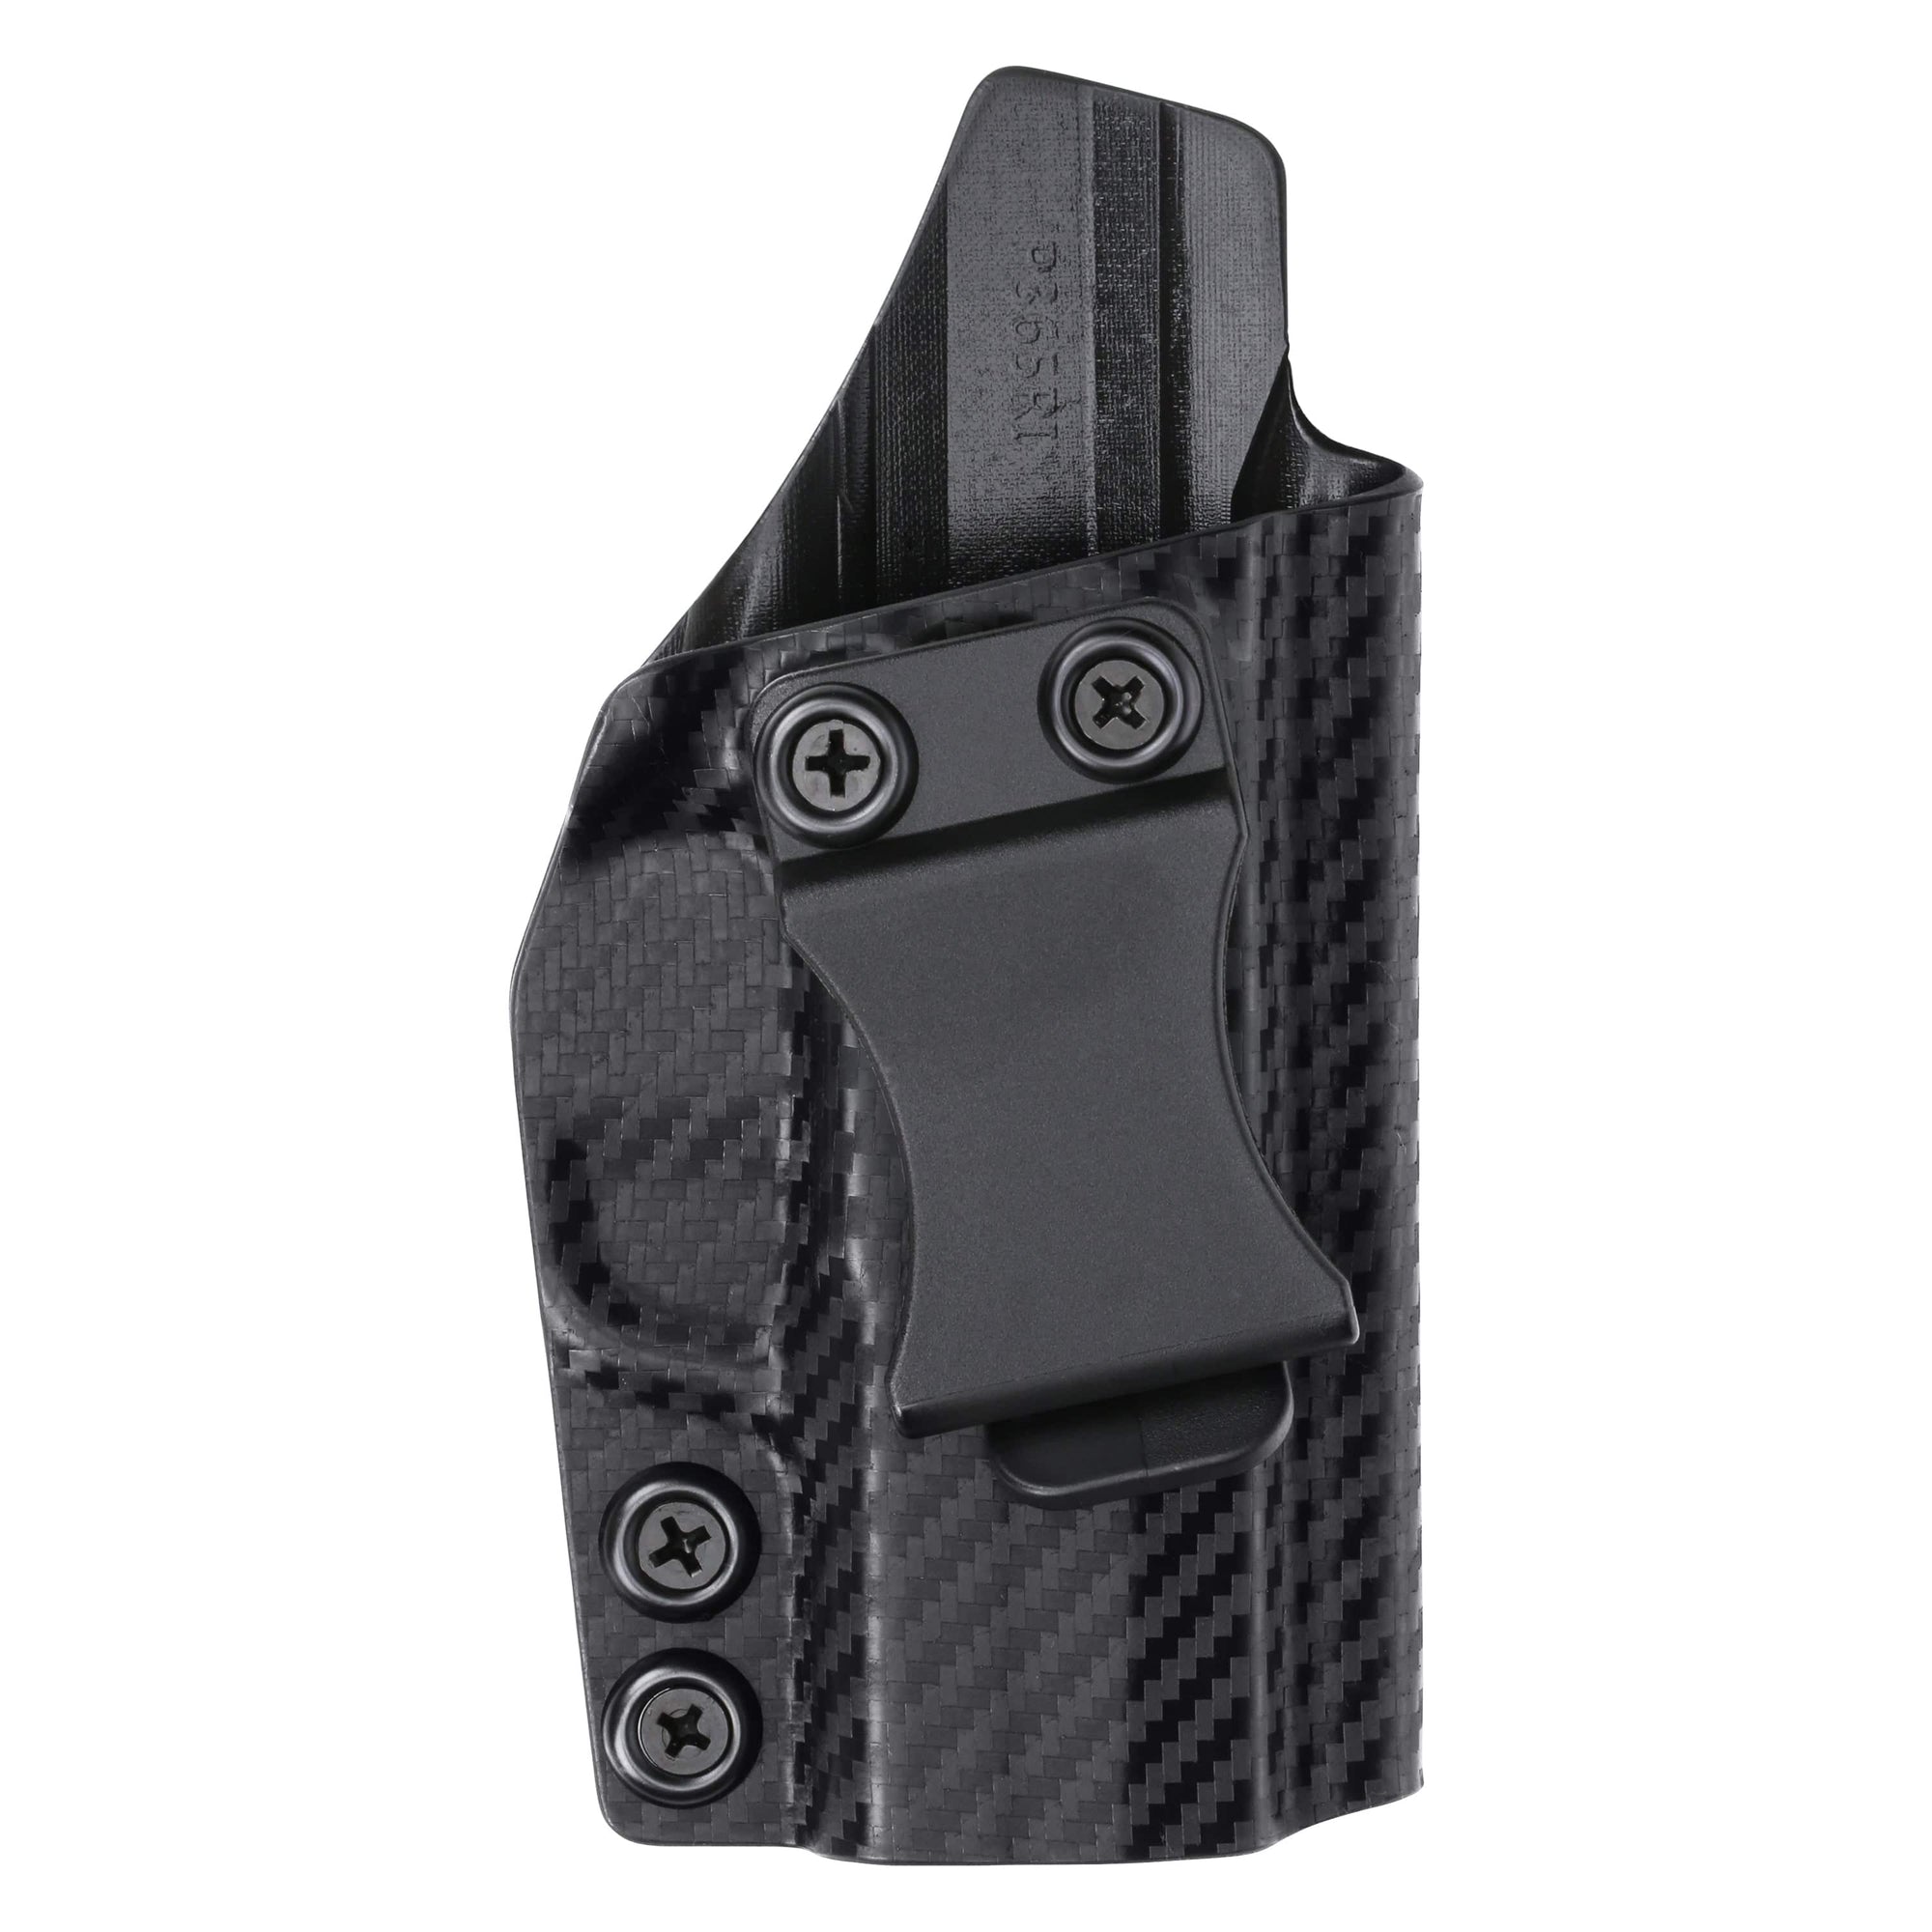 SHADOW 2 COMPACT HOLSTERS